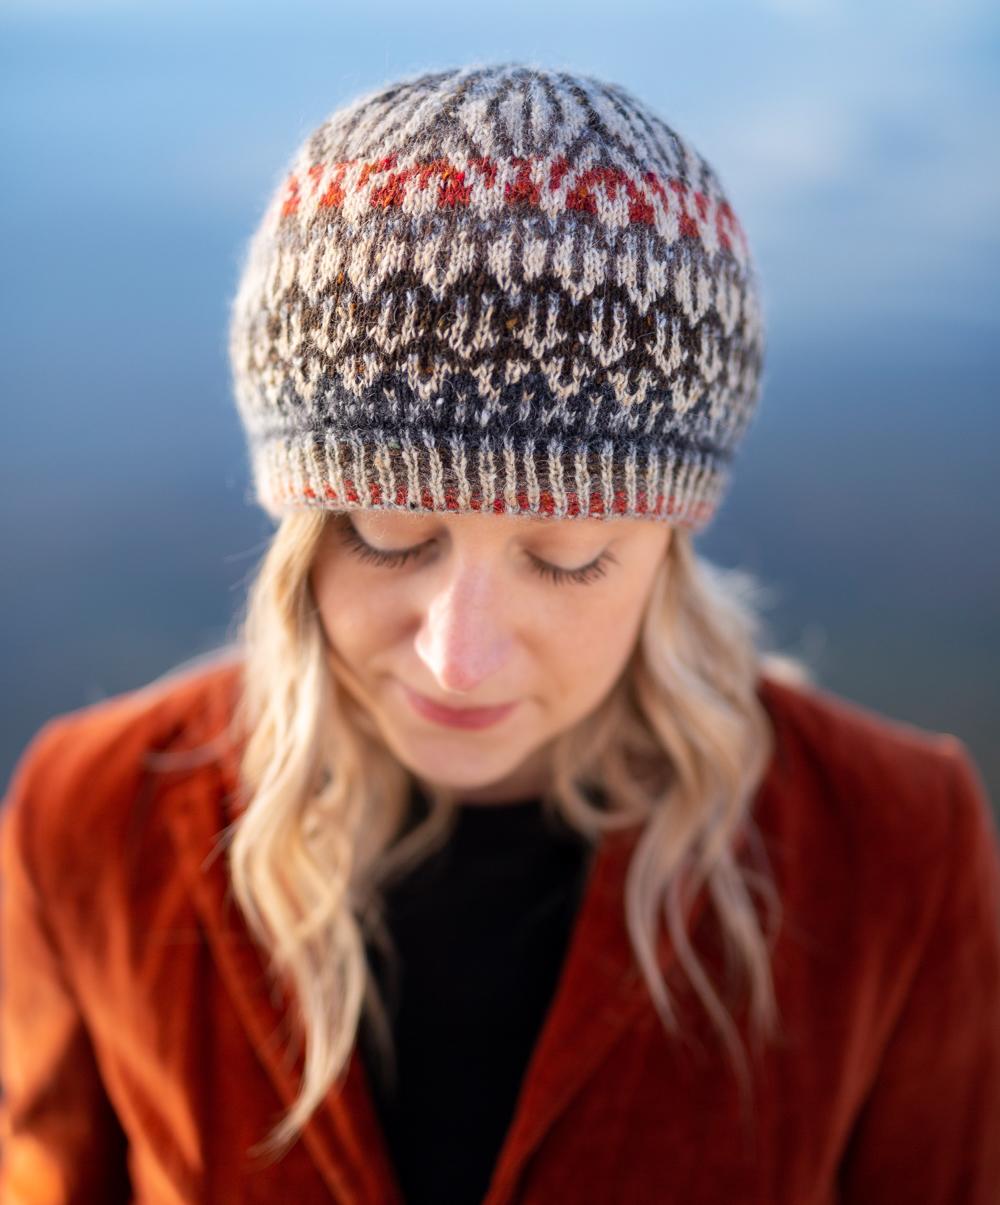 Jane Hunter Models Featherheid - a stranded colourwork hat design based on duck plumage; the background is blue with lochs and skylines